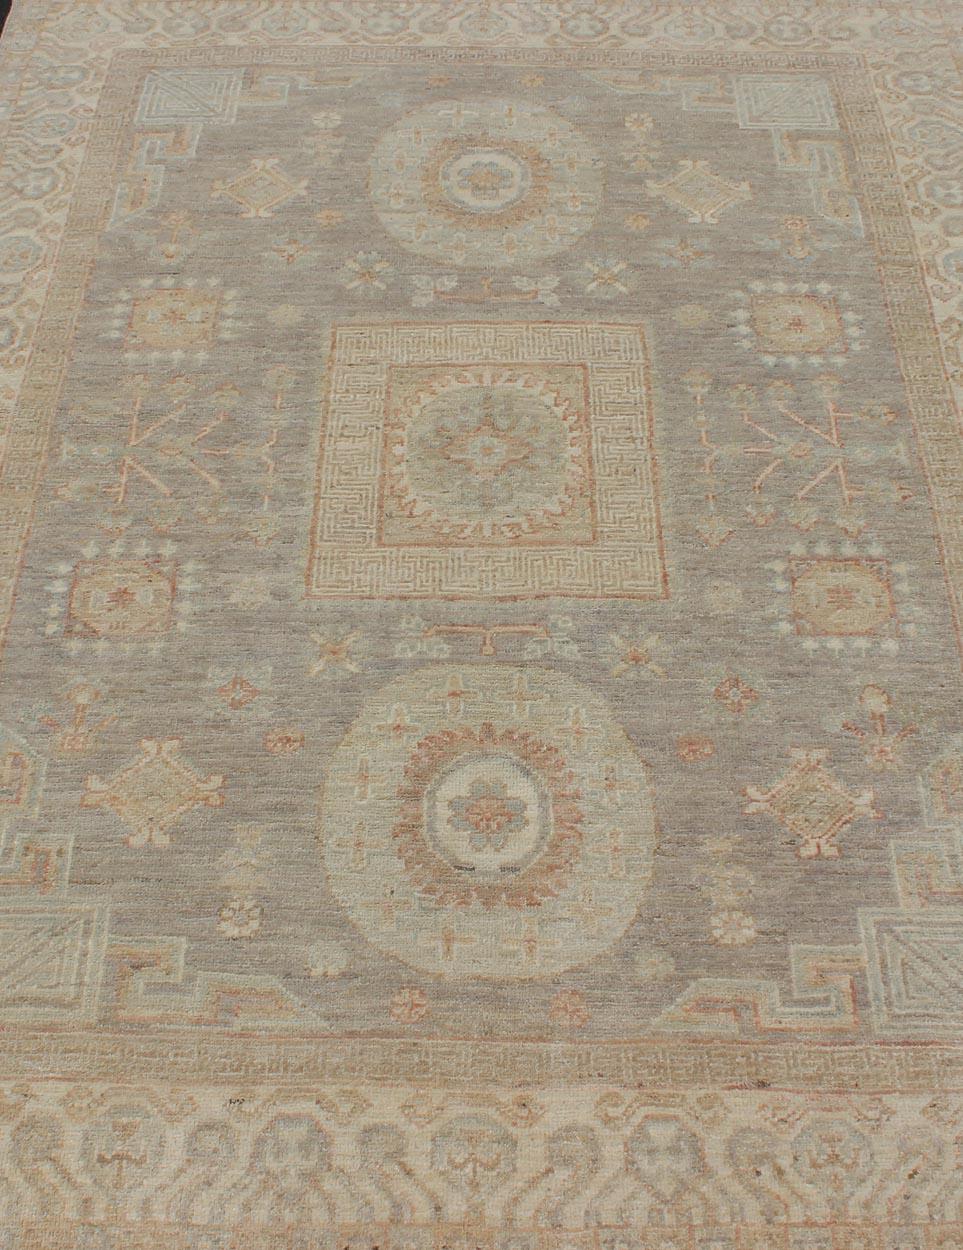 Wool Fine Khotan Design Rug with Samarkand Design in Muted Tones For Sale